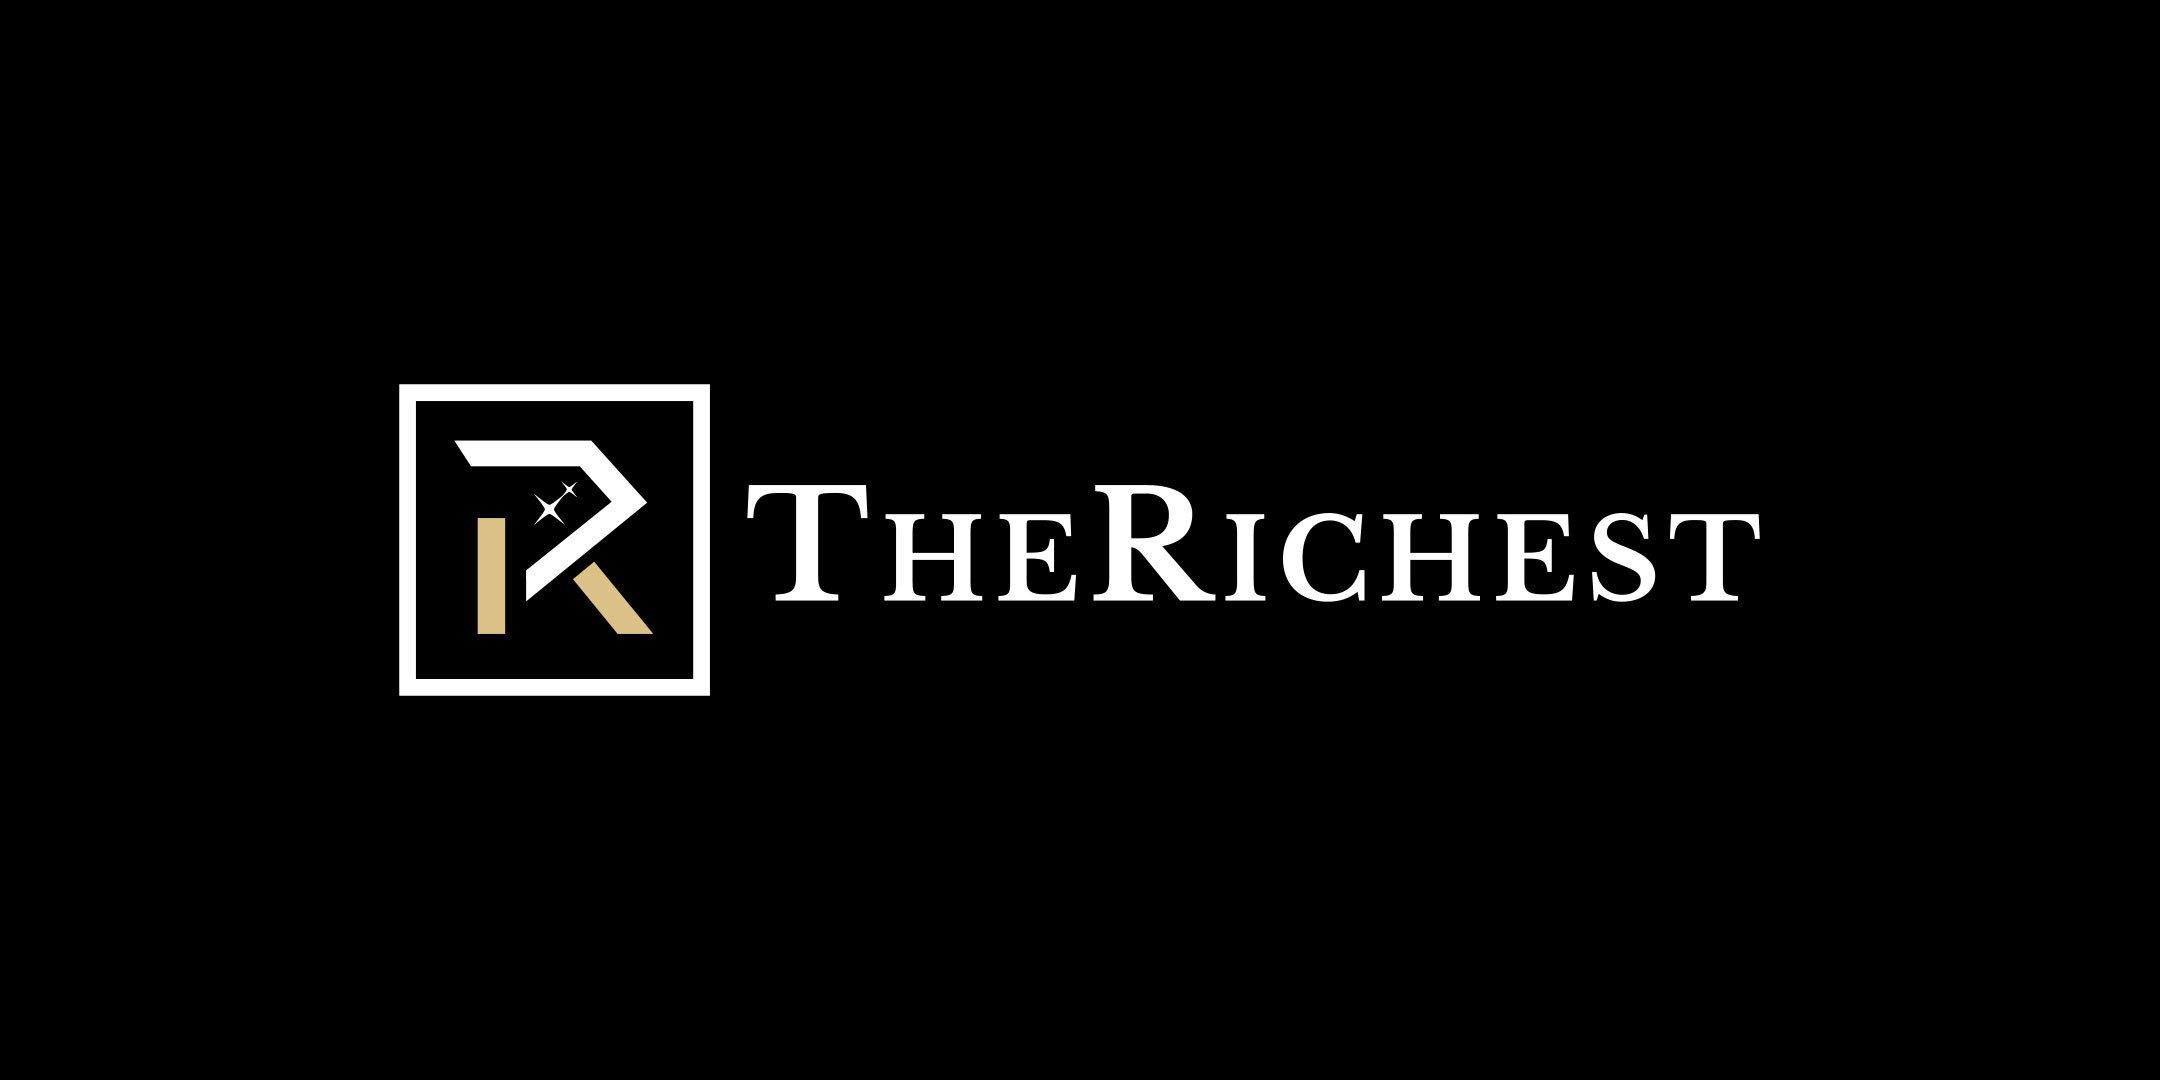 www.therichest.com